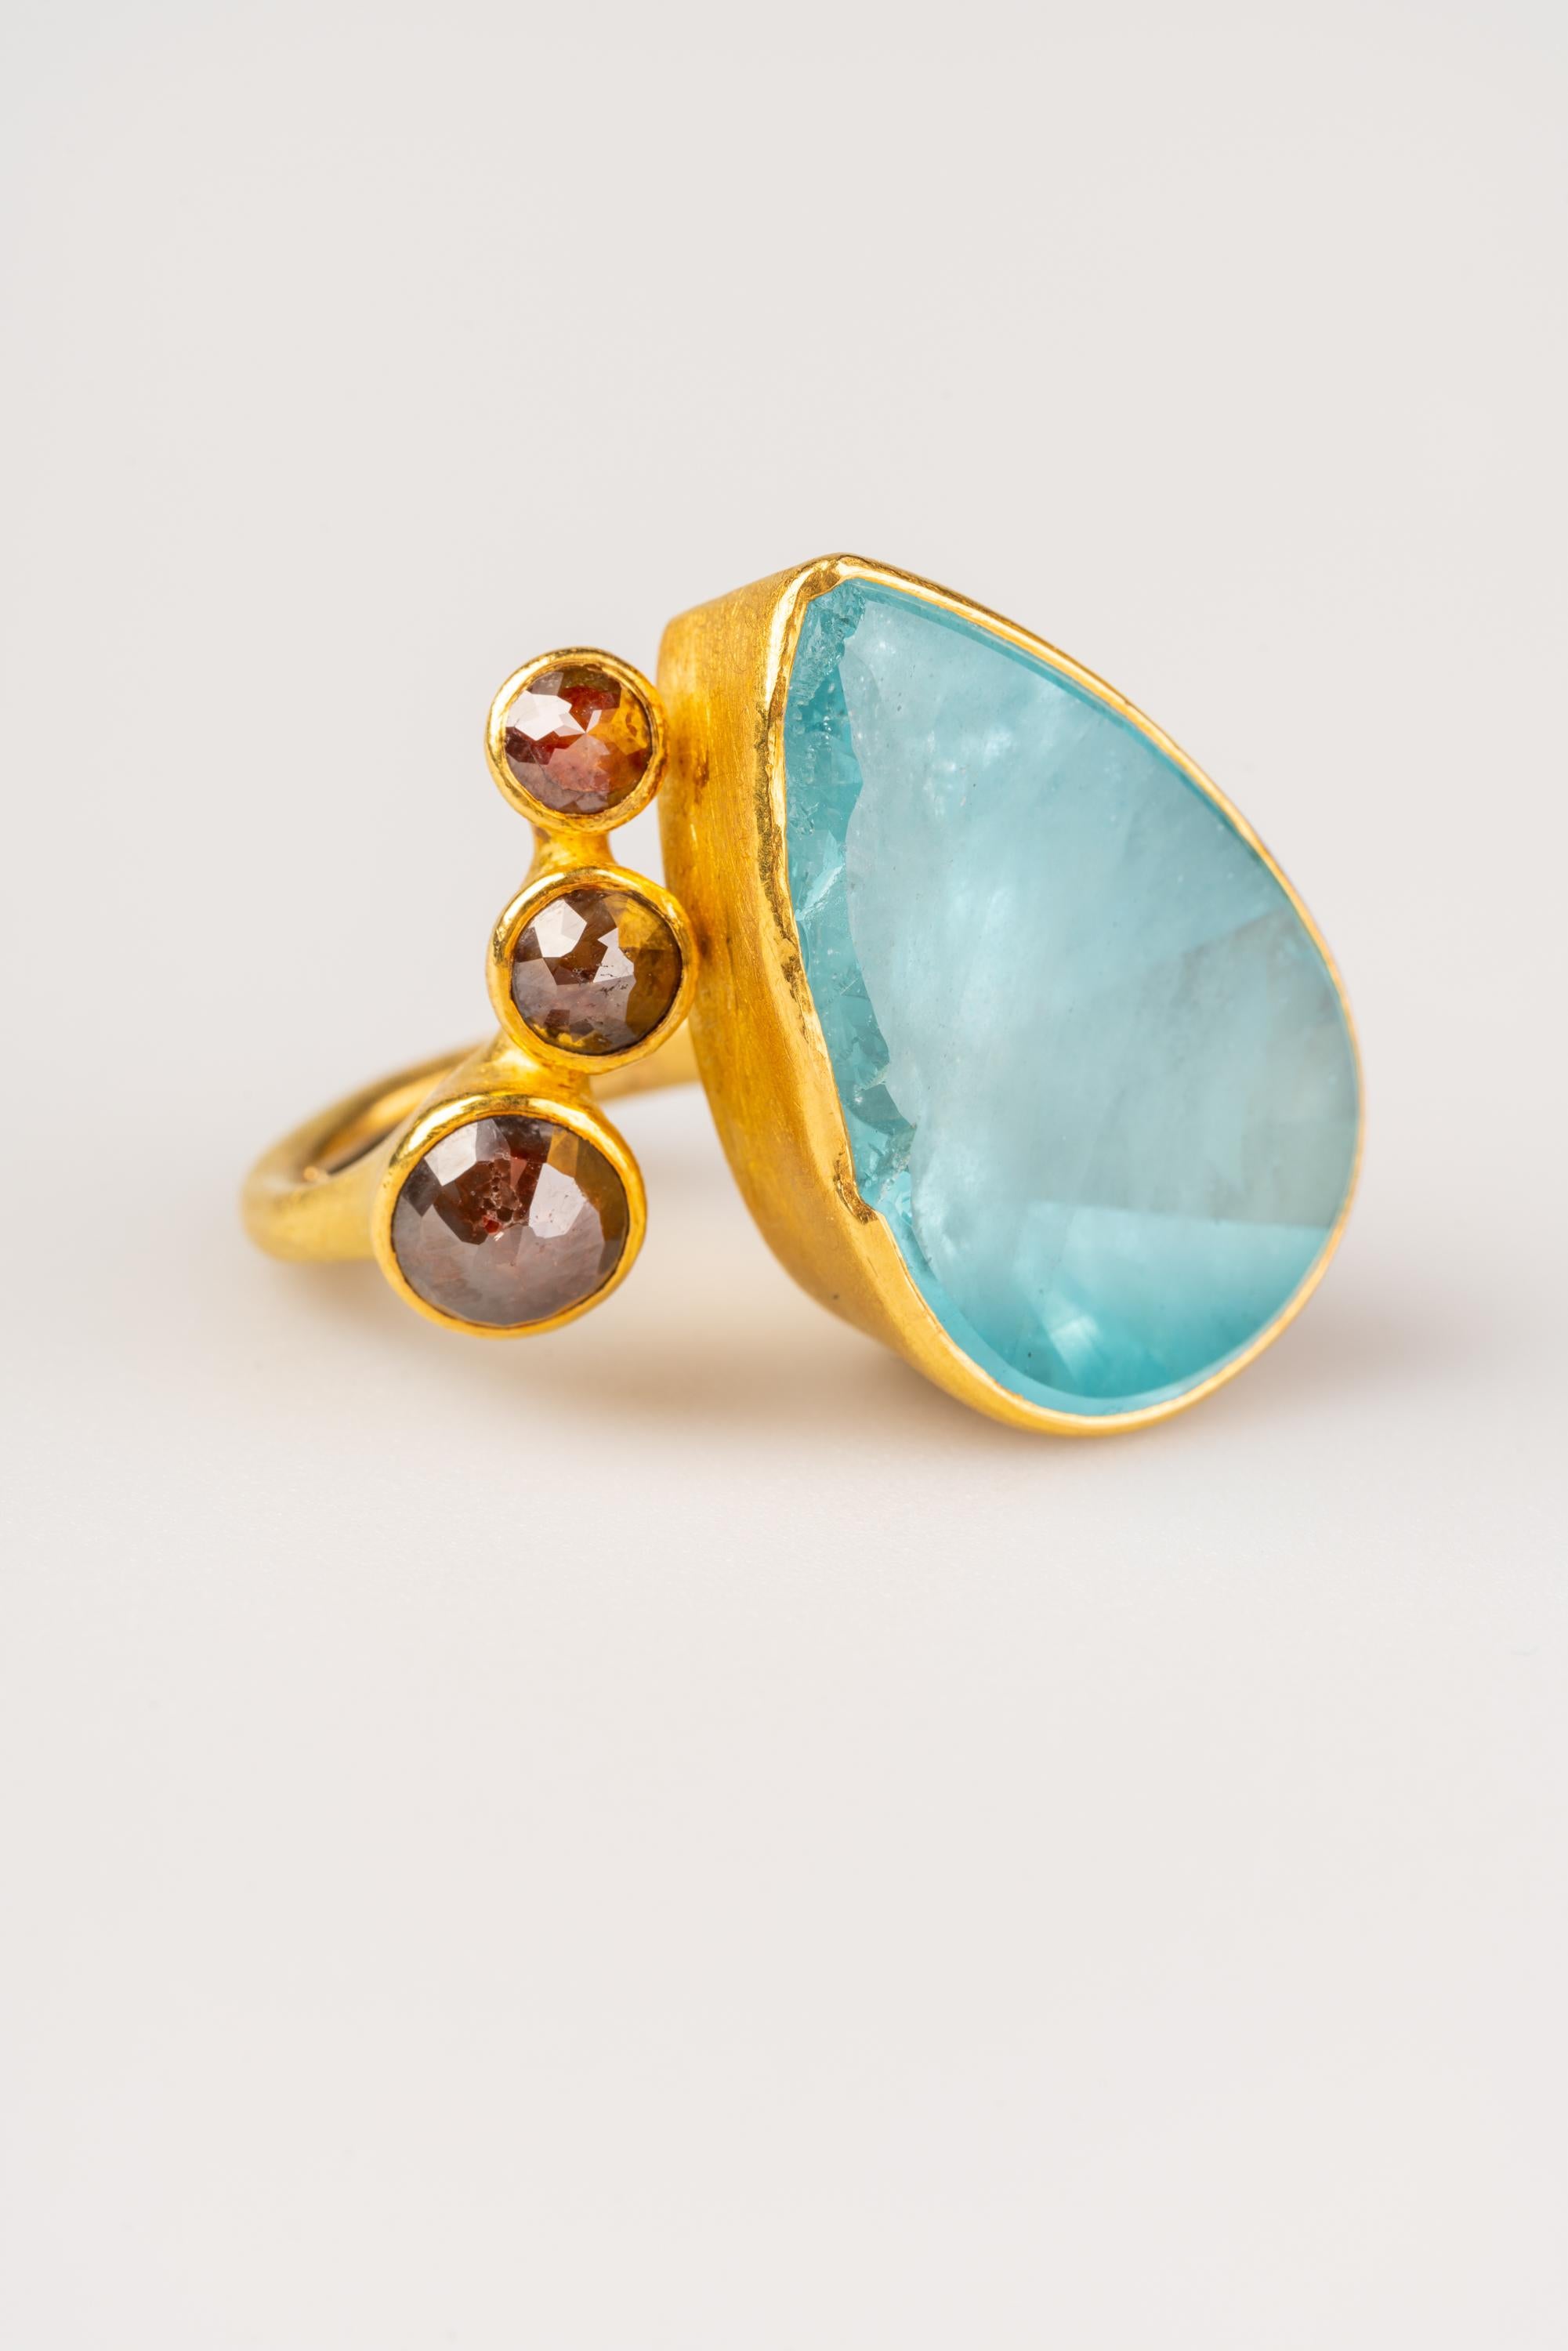 An 18k yellow gold ring set with a pear shaped natural surface aquamarine, 45.82 carats and 3 rose cut reddish brown opaque diamonds for a total of 3.23 carats. Ring size 8. This ring was designed and made by Peter Schmid.